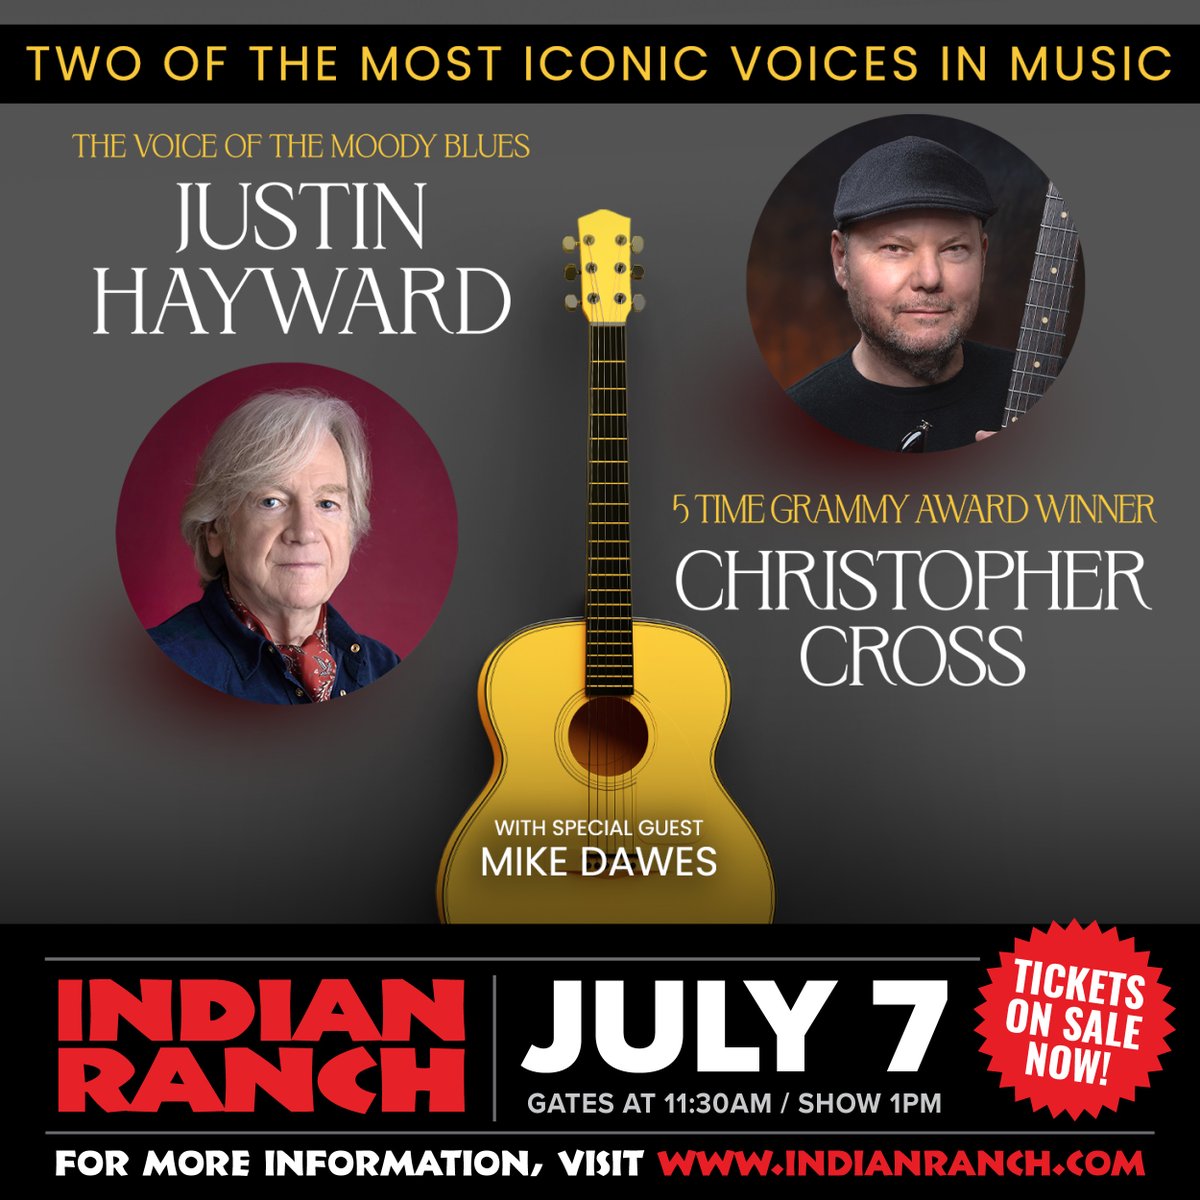 2024 Concert Week Deal🎉

Get your GA tickets to Justin Hayward and Christopher Cross for JUST $25 through tonight at 11:59 PM, while supplies last! Buy now at indianranch.com🎟️
·
·
#justinhayward #christophercross #tickets #music #livemusic #concert #show #entertainment